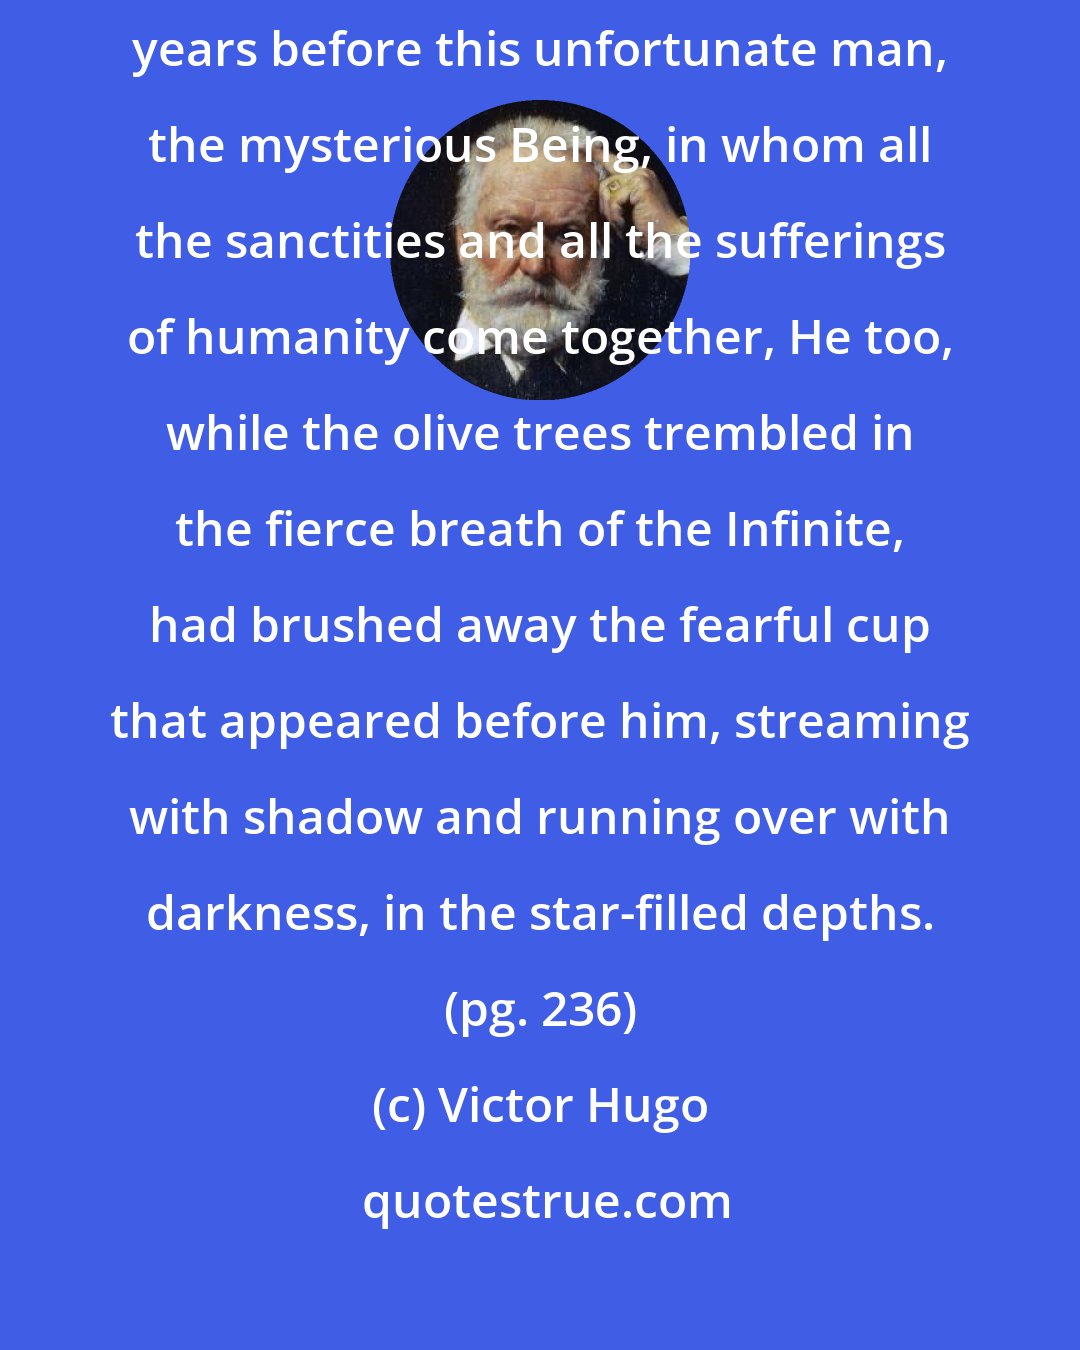 Victor Hugo: In this way, his unhappy soul struggled with its anguish. Eighteen hundred years before this unfortunate man, the mysterious Being, in whom all the sanctities and all the sufferings of humanity come together, He too, while the olive trees trembled in the fierce breath of the Infinite, had brushed away the fearful cup that appeared before him, streaming with shadow and running over with darkness, in the star-filled depths. (pg. 236)